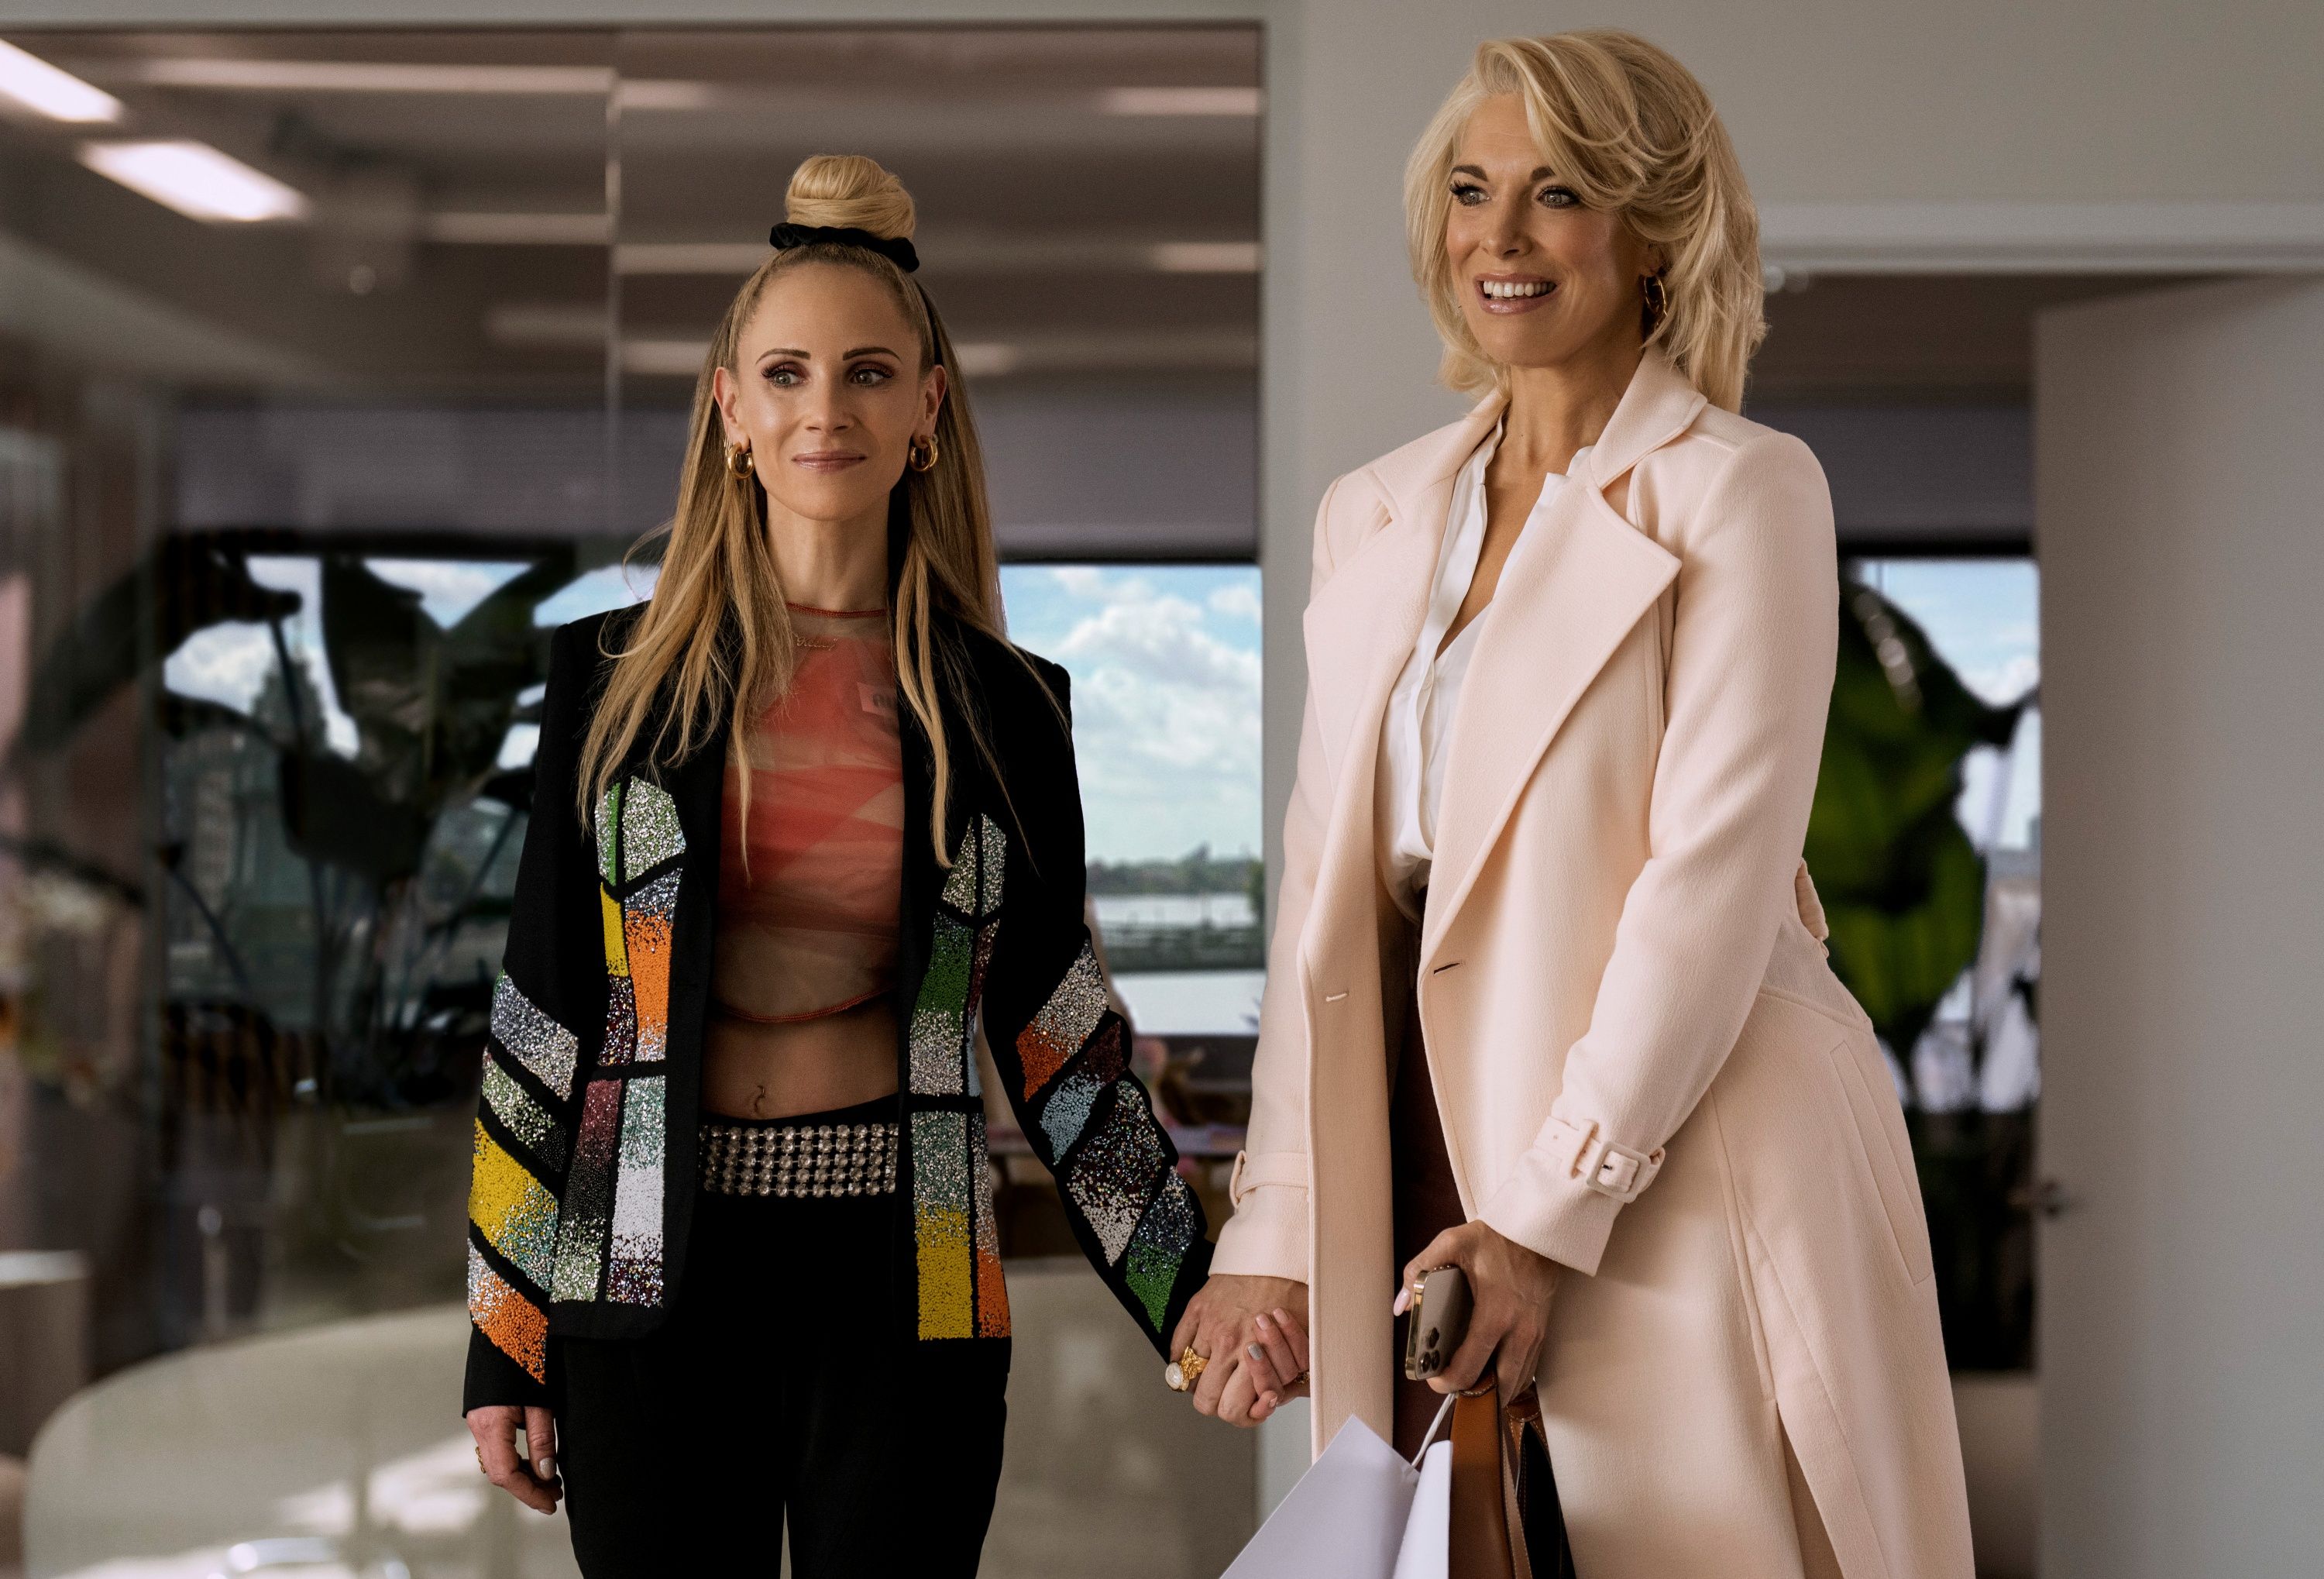 Hannah Waddingham as Rebecca Welton and Juno Temple as Keeley Jones in Season 3 of Ted Lasso